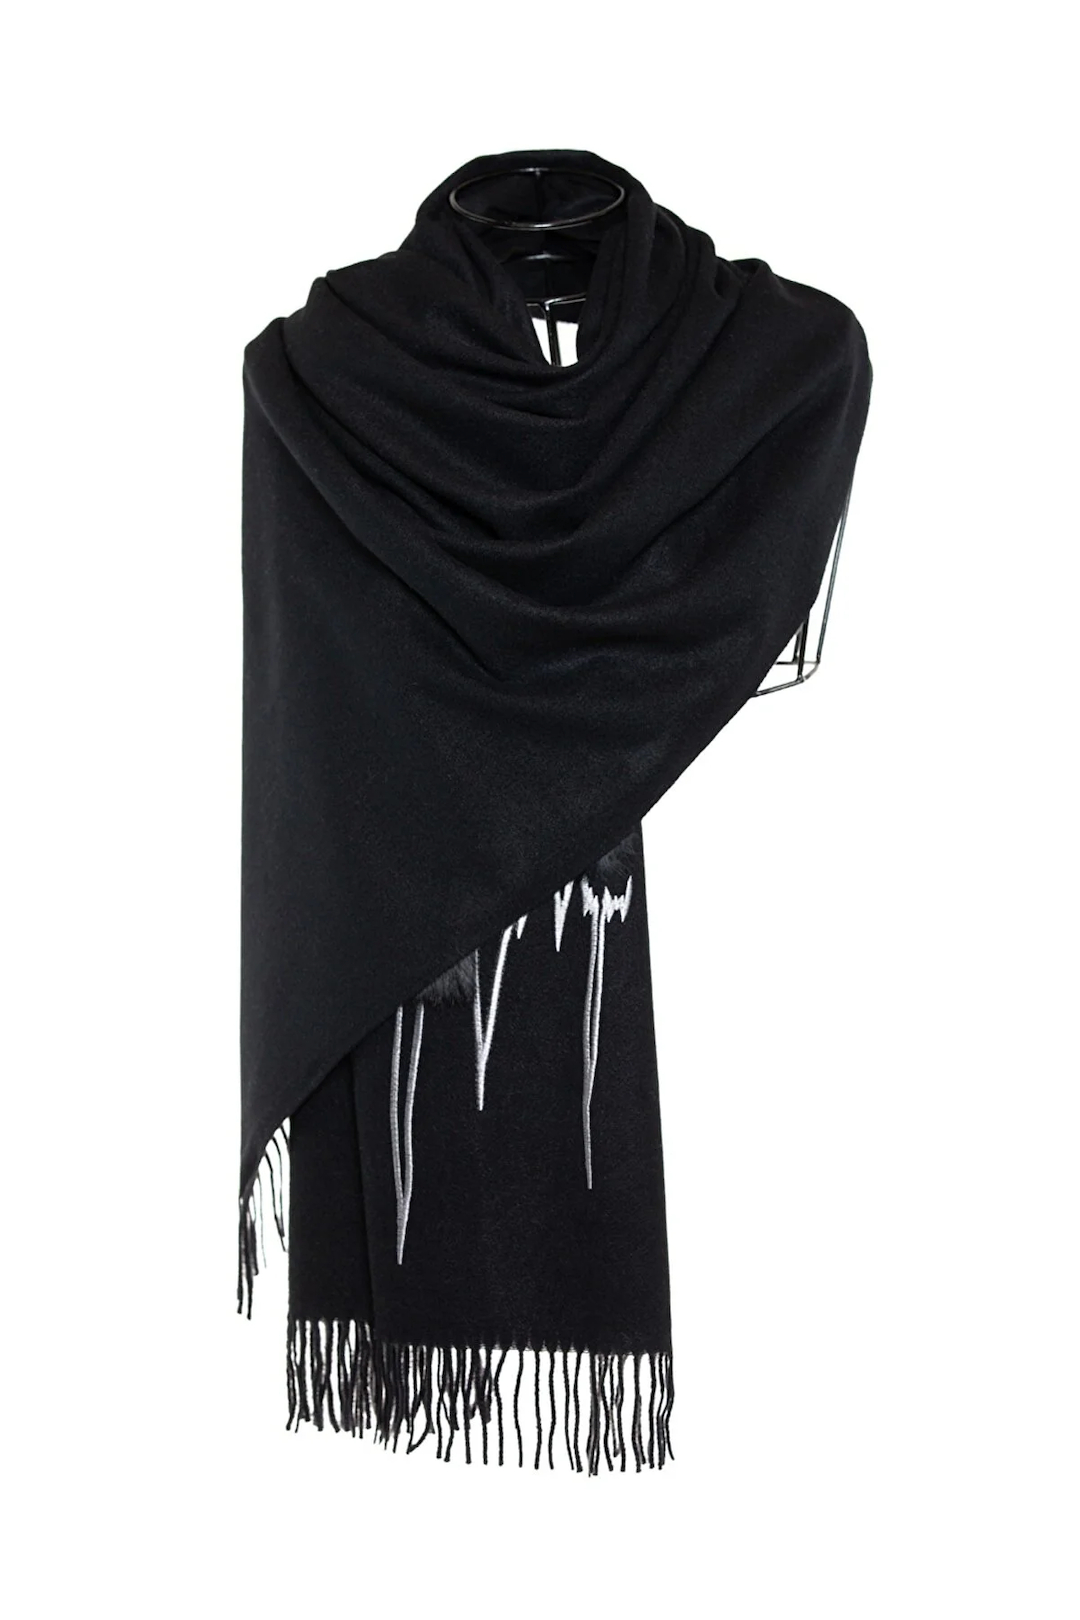 Heart Beat Embroidered Shawl with Faux Fur Pon Pons - Black